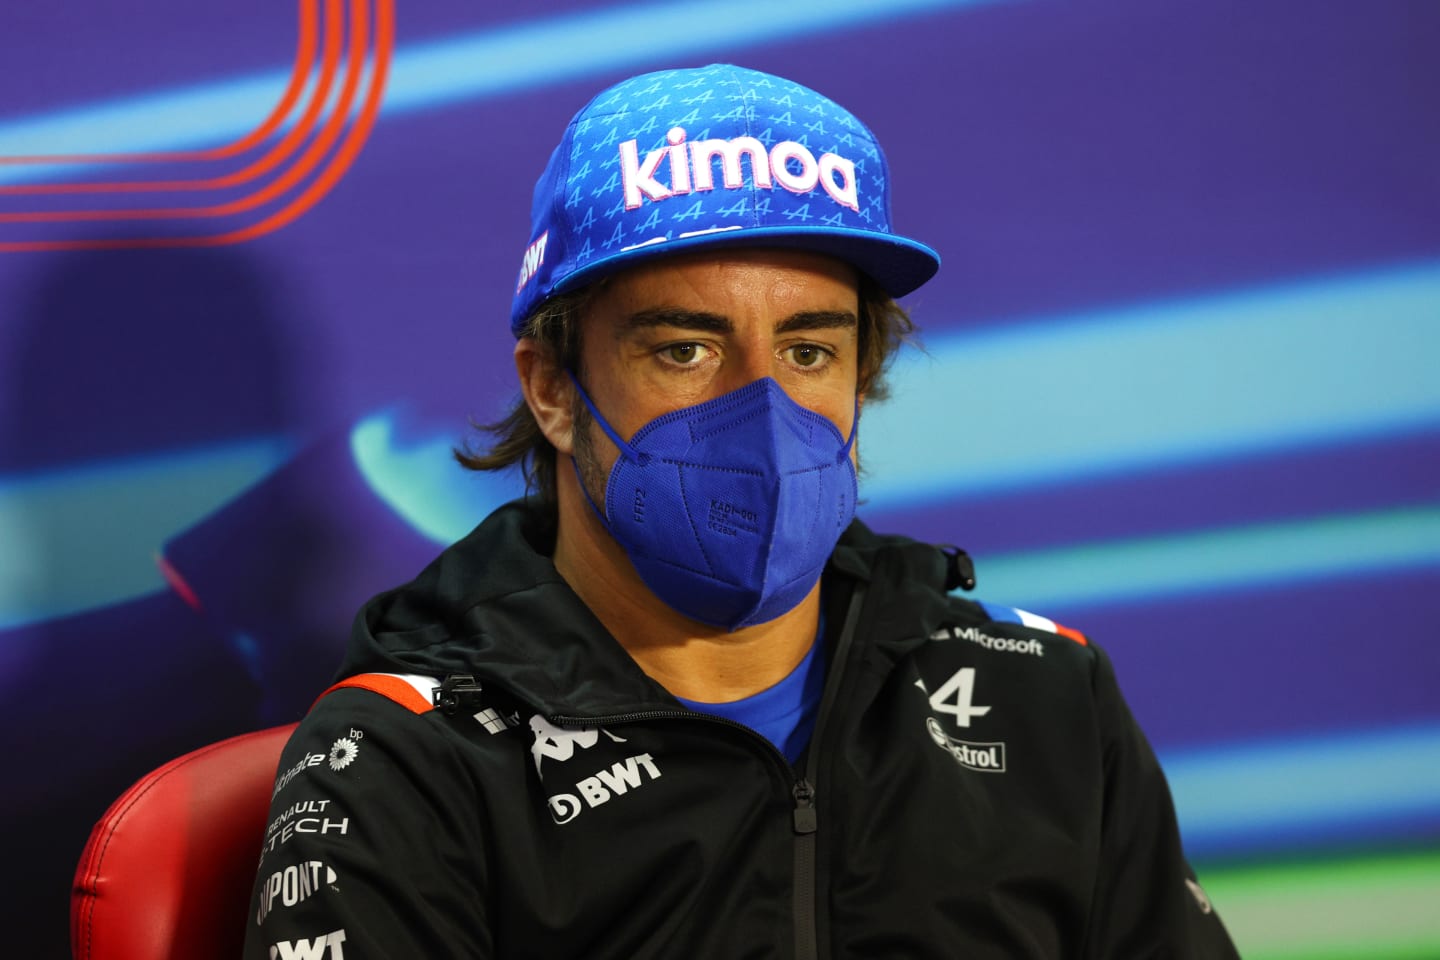 BAHRAIN, BAHRAIN - MARCH 18: Fernando Alonso of Spain and Alpine F1 talks in the Drivers Press Conference before practice ahead of the F1 Grand Prix of Bahrain at Bahrain International Circuit on March 18, 2022 in Bahrain, Bahrain. (Photo by Lars Baron/Getty Images)